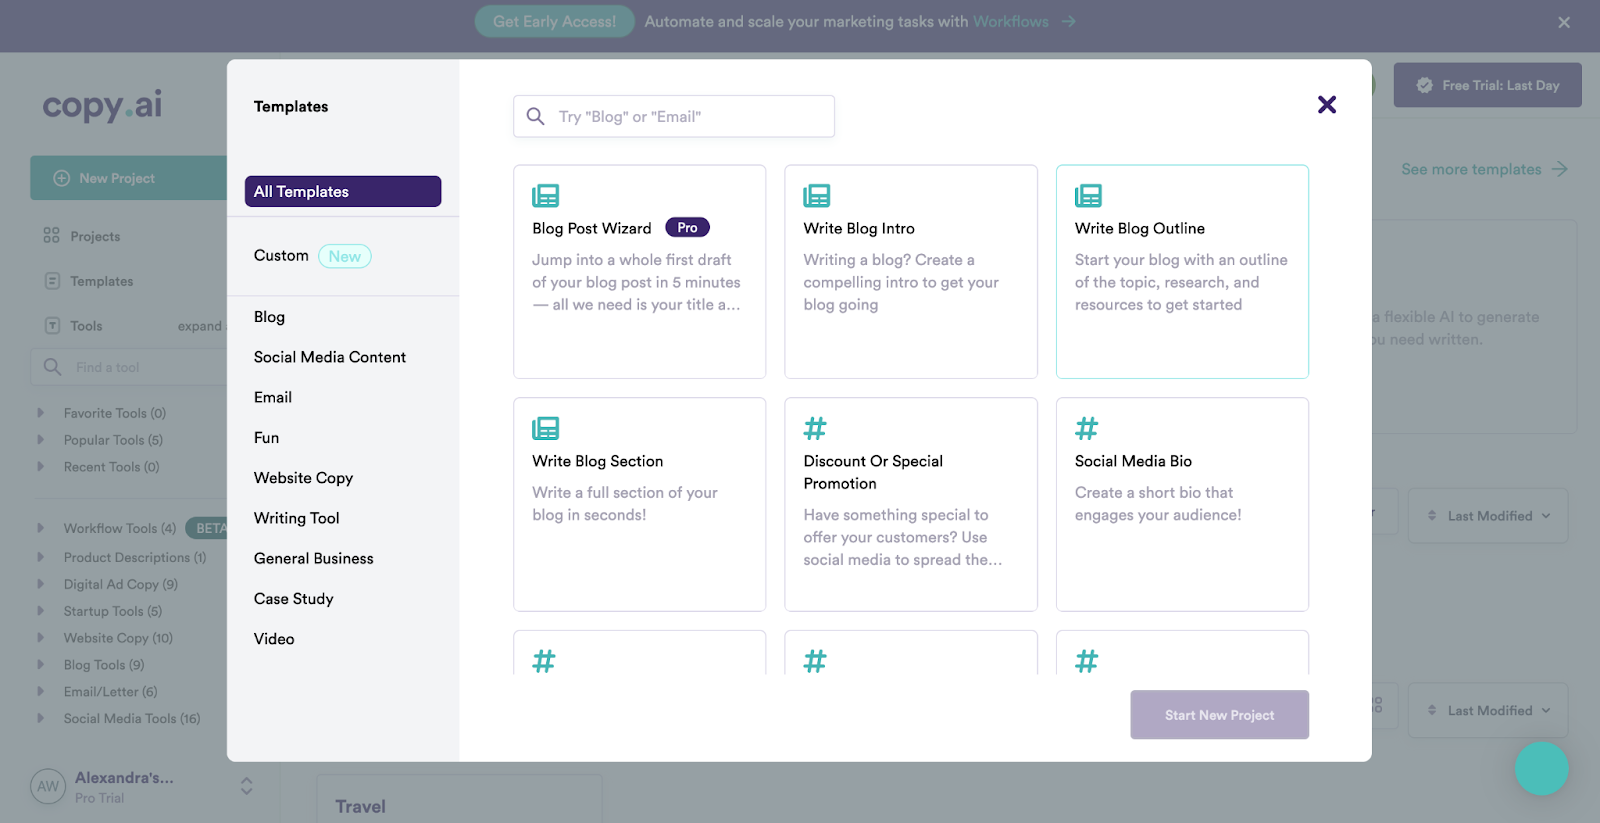 A screenshot of the Copy.ai dashboard featuring available content templates